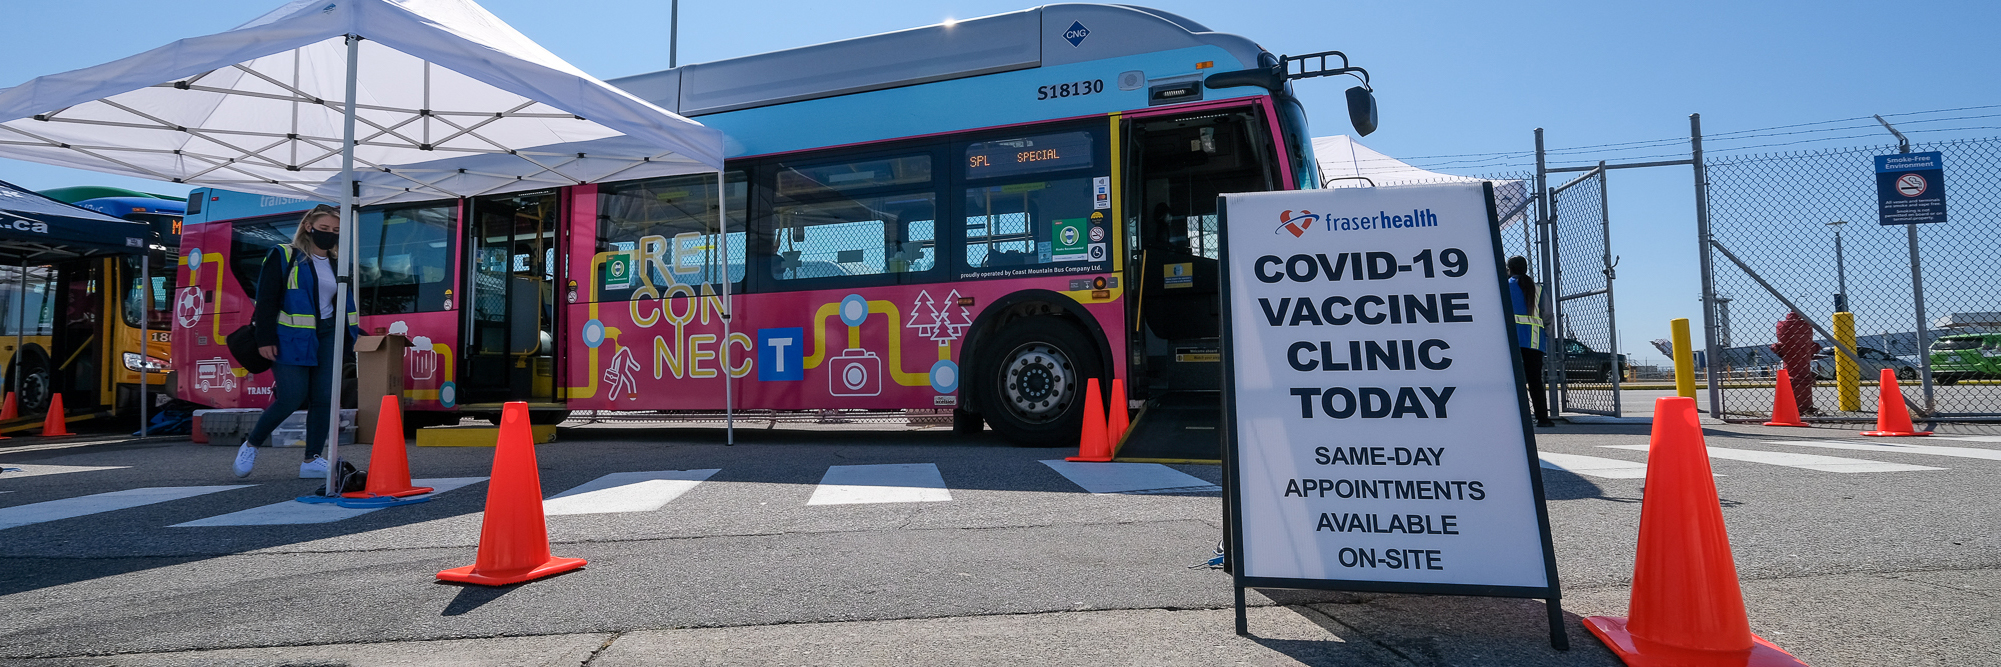 COVID-19 Vaccine Clinic Today sign in front of the mobile vaccine bus